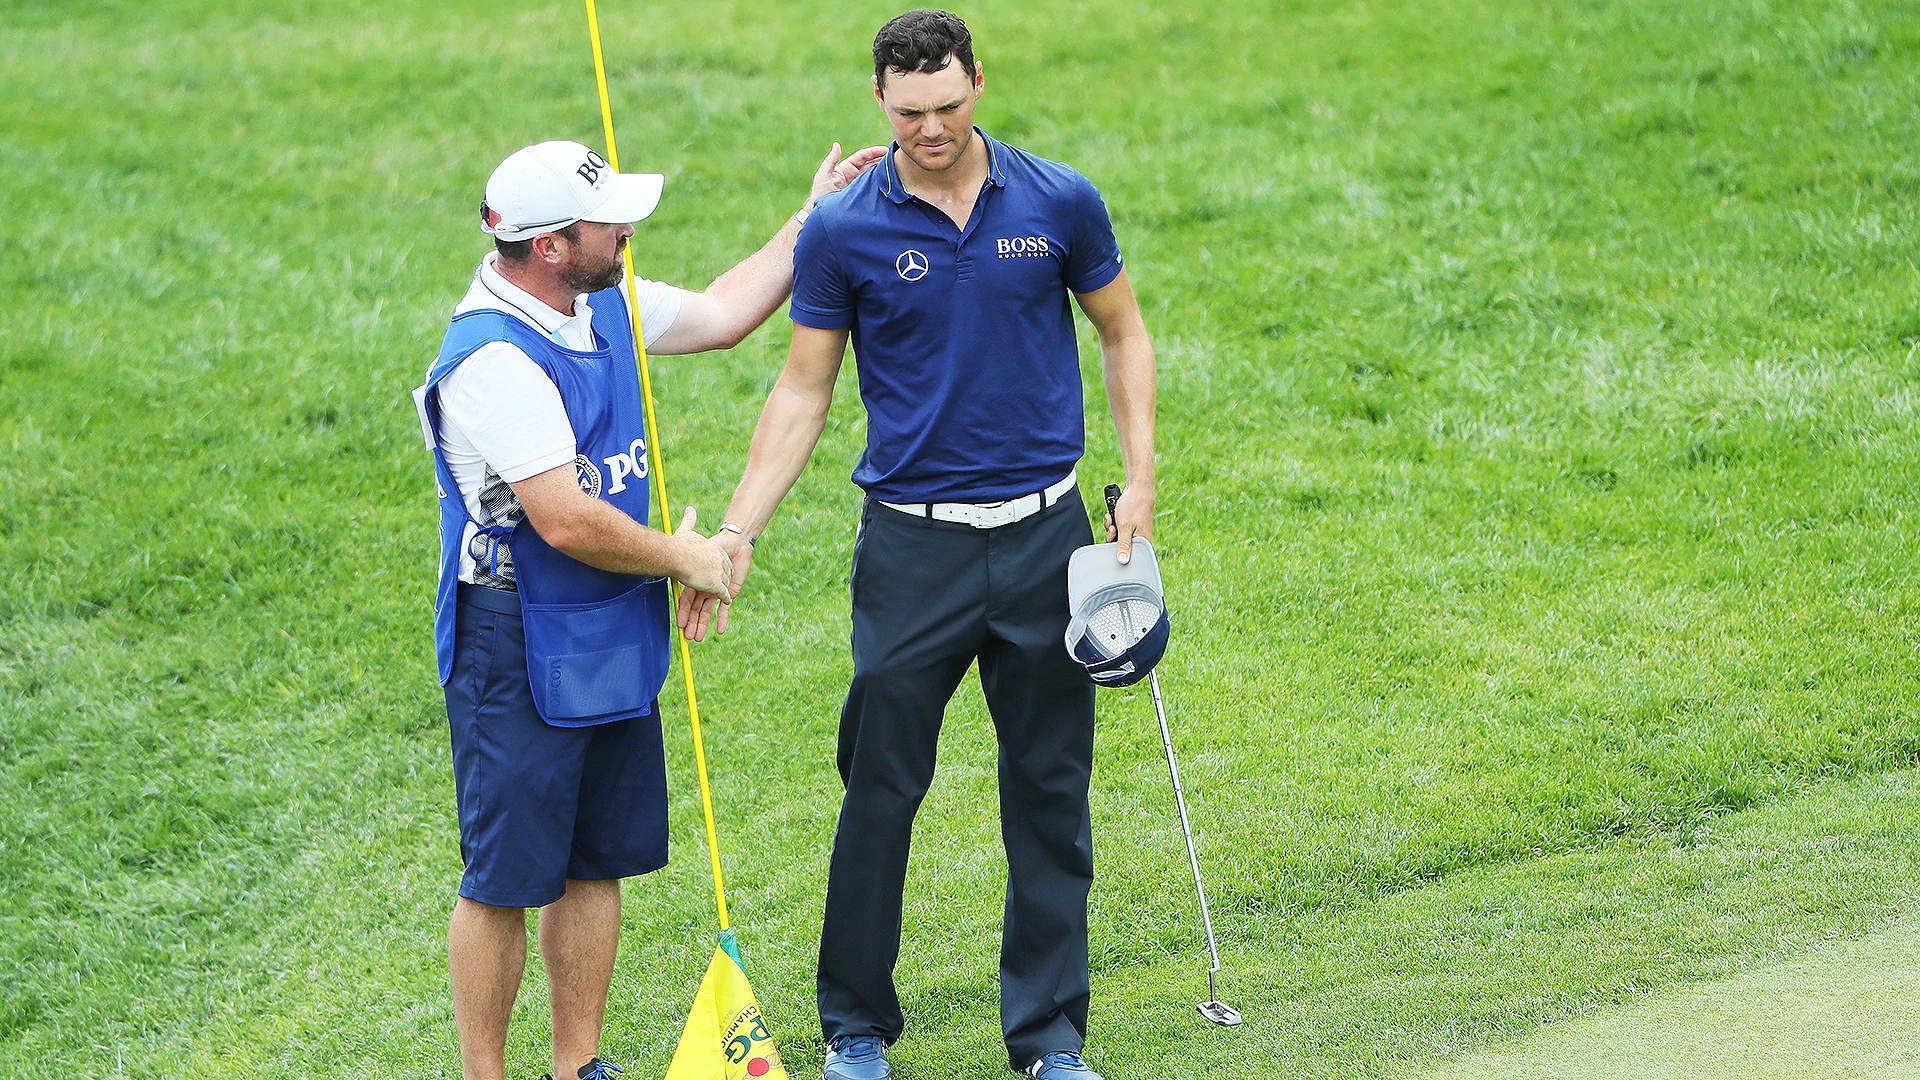 Report: Former No. 1 Kaymer splits with longtime caddie